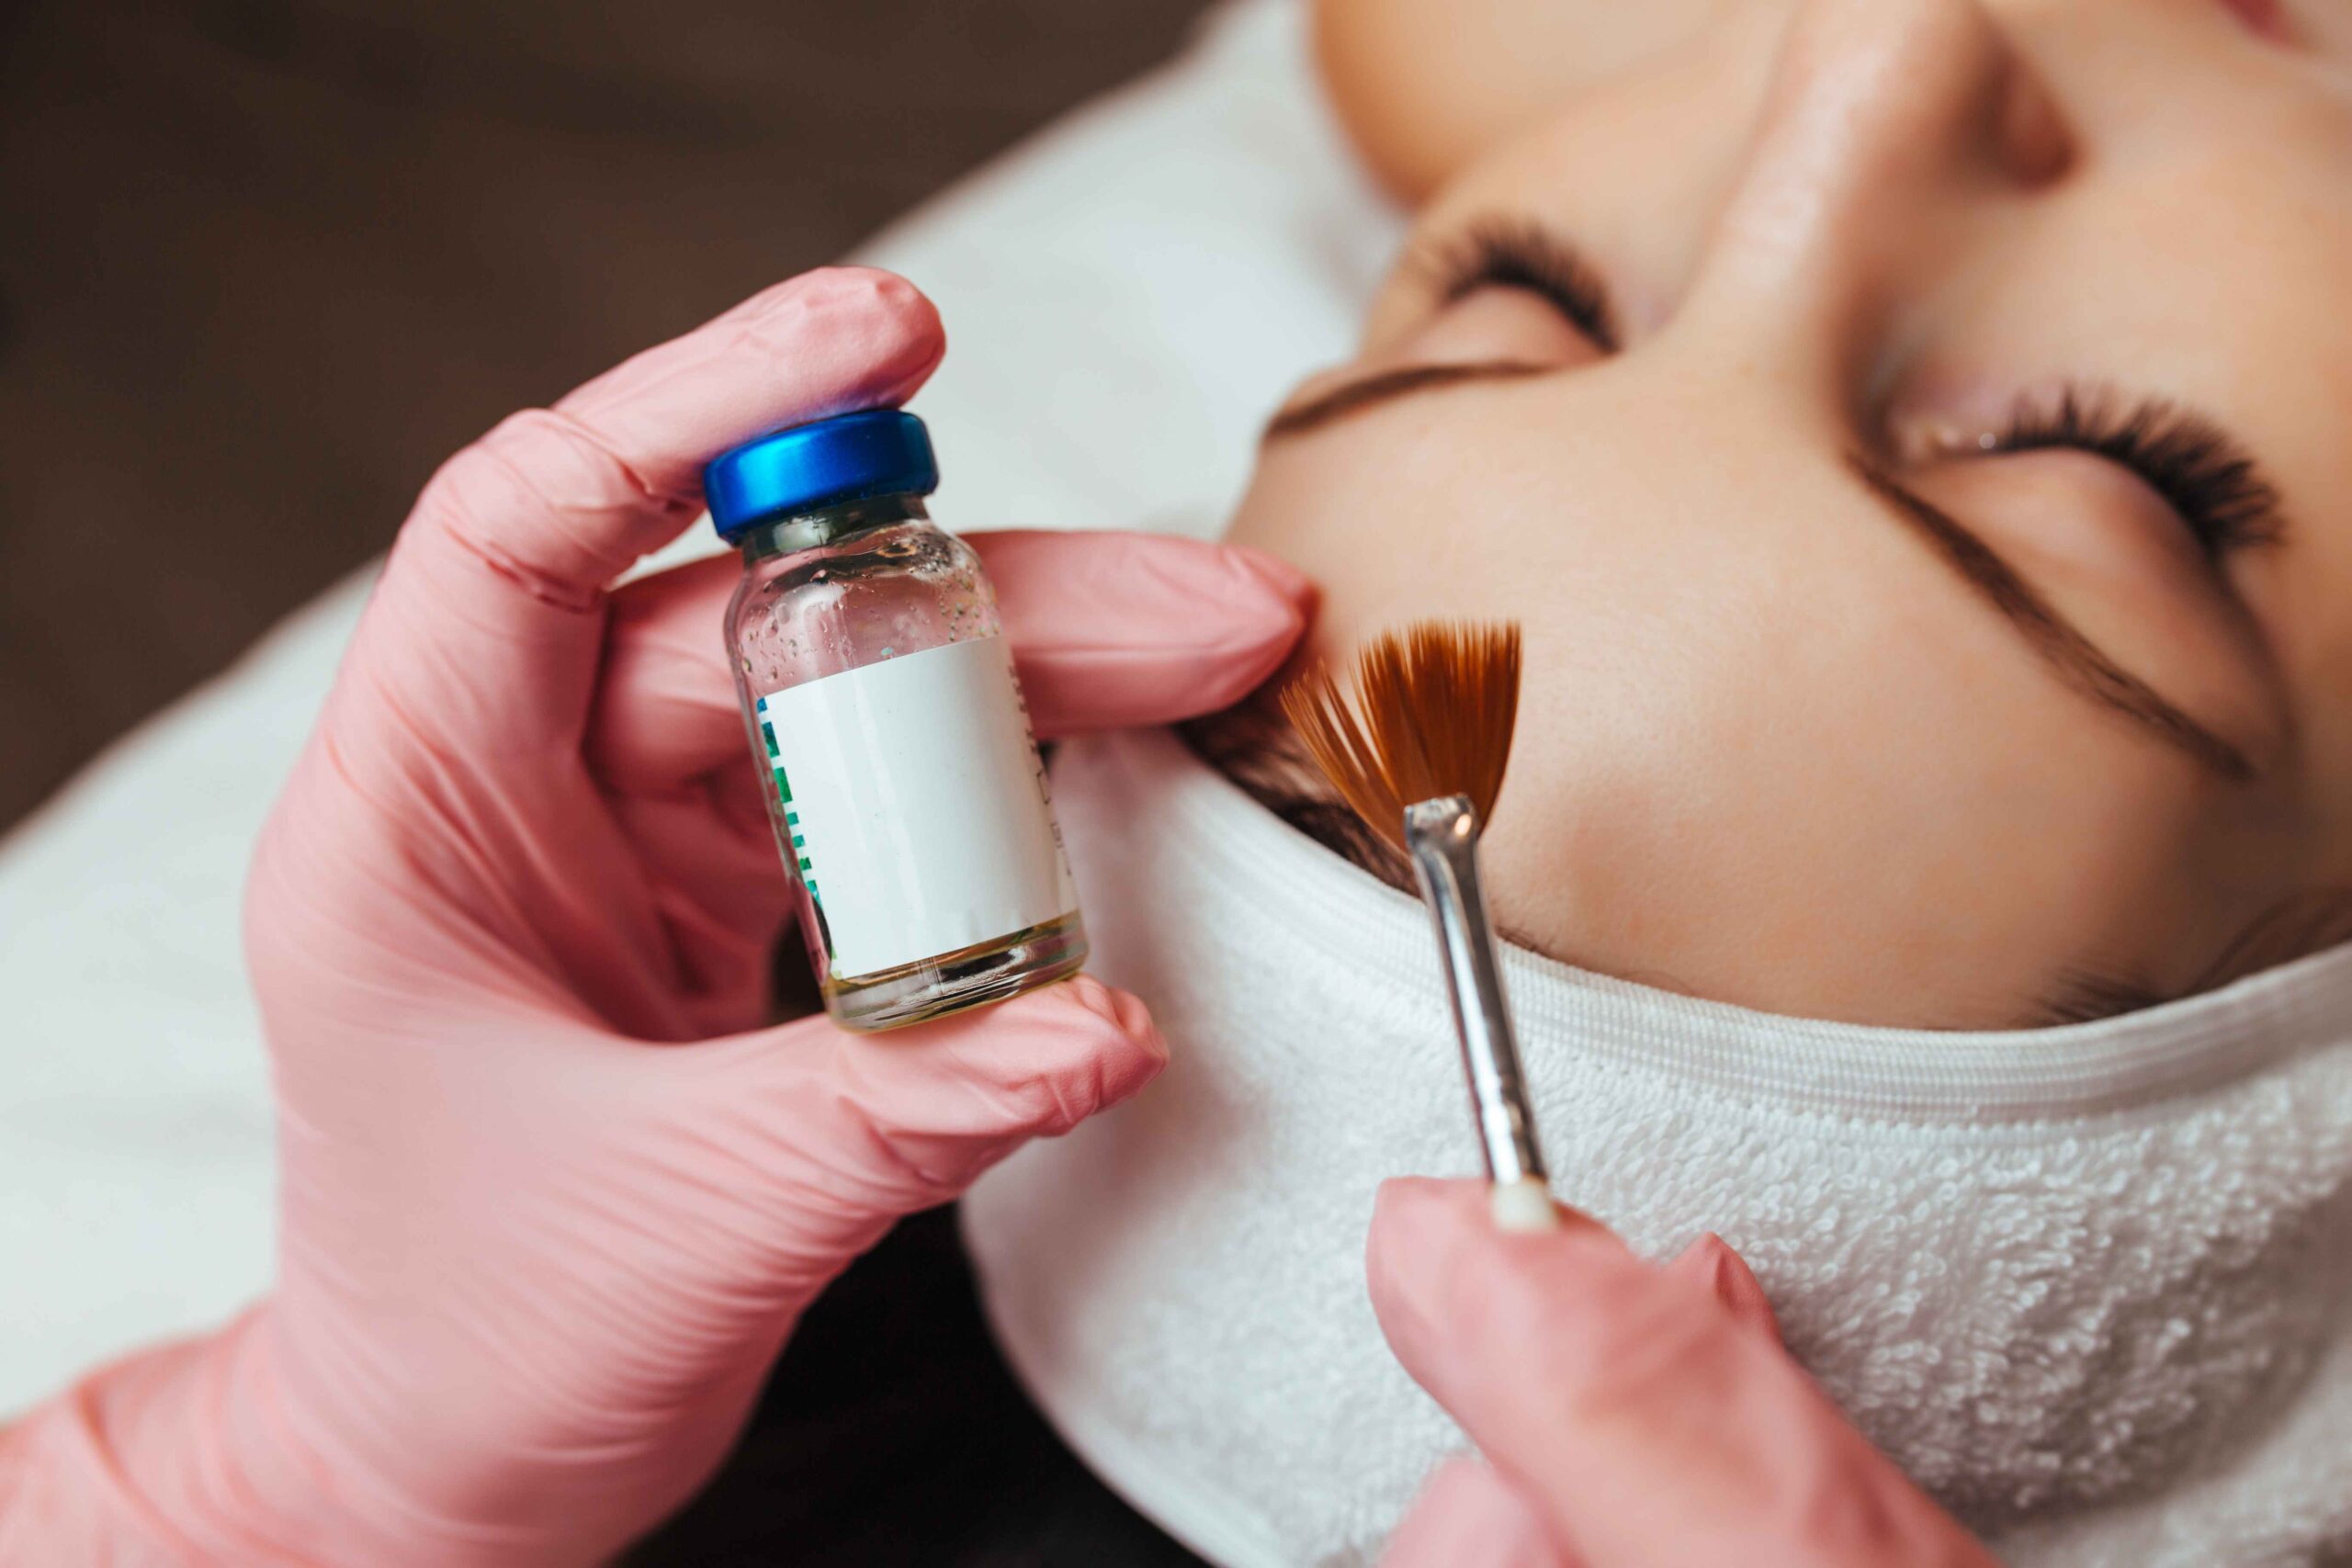 Chemical Peels | New Look Skin Center Medical Spa in Glendale, Encino and Irvine, CA